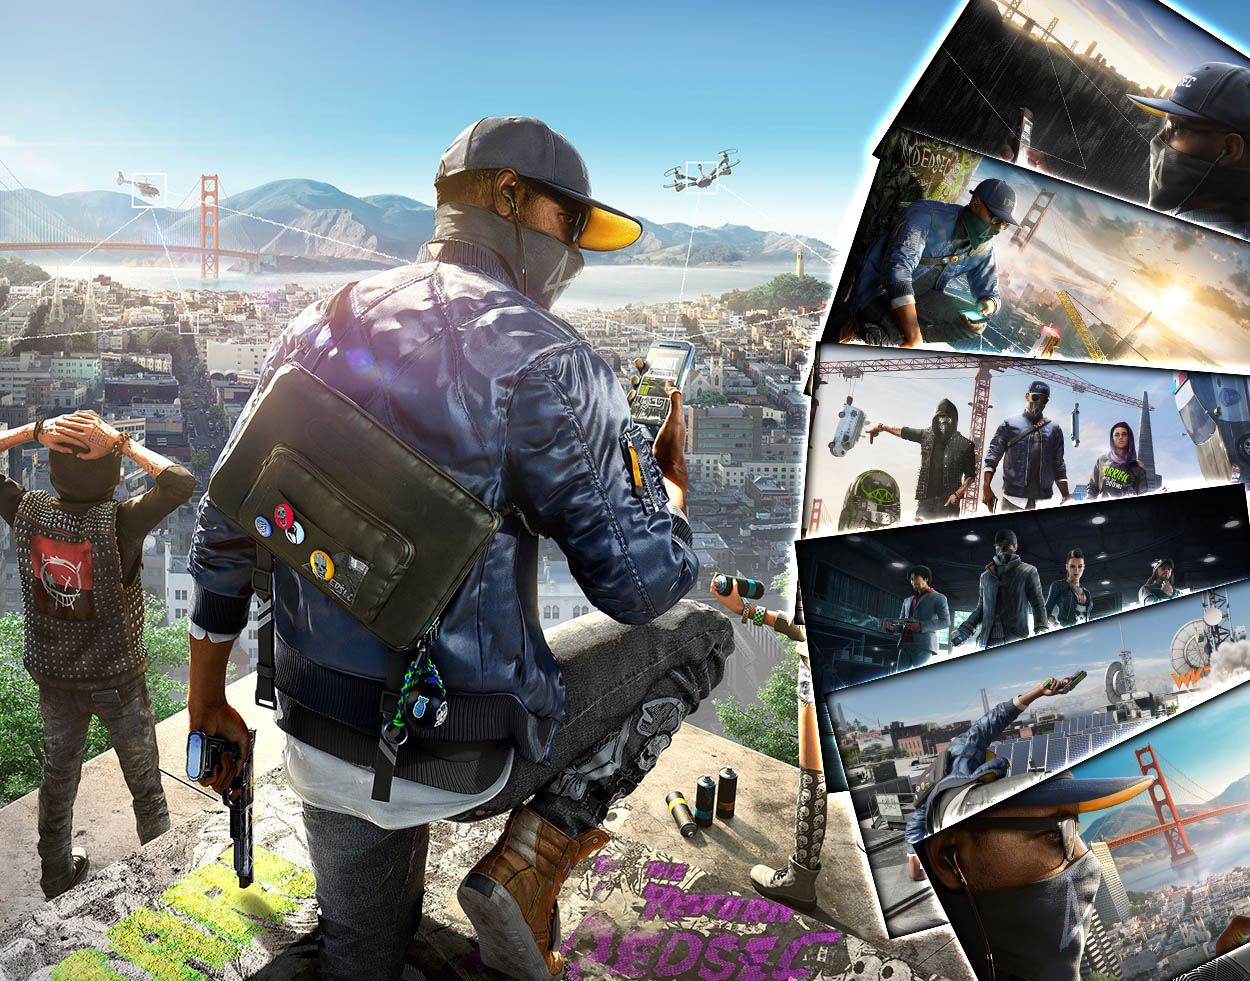 Free Download Dgamex Watch Dogs 2 Detalles Del Juegowallpapers Hd 4k 1250x981 For Your Desktop Mobile Tablet Explore 73 Watch Dogs 2 Video Game Wallpapers Watch Dogs 2 Video